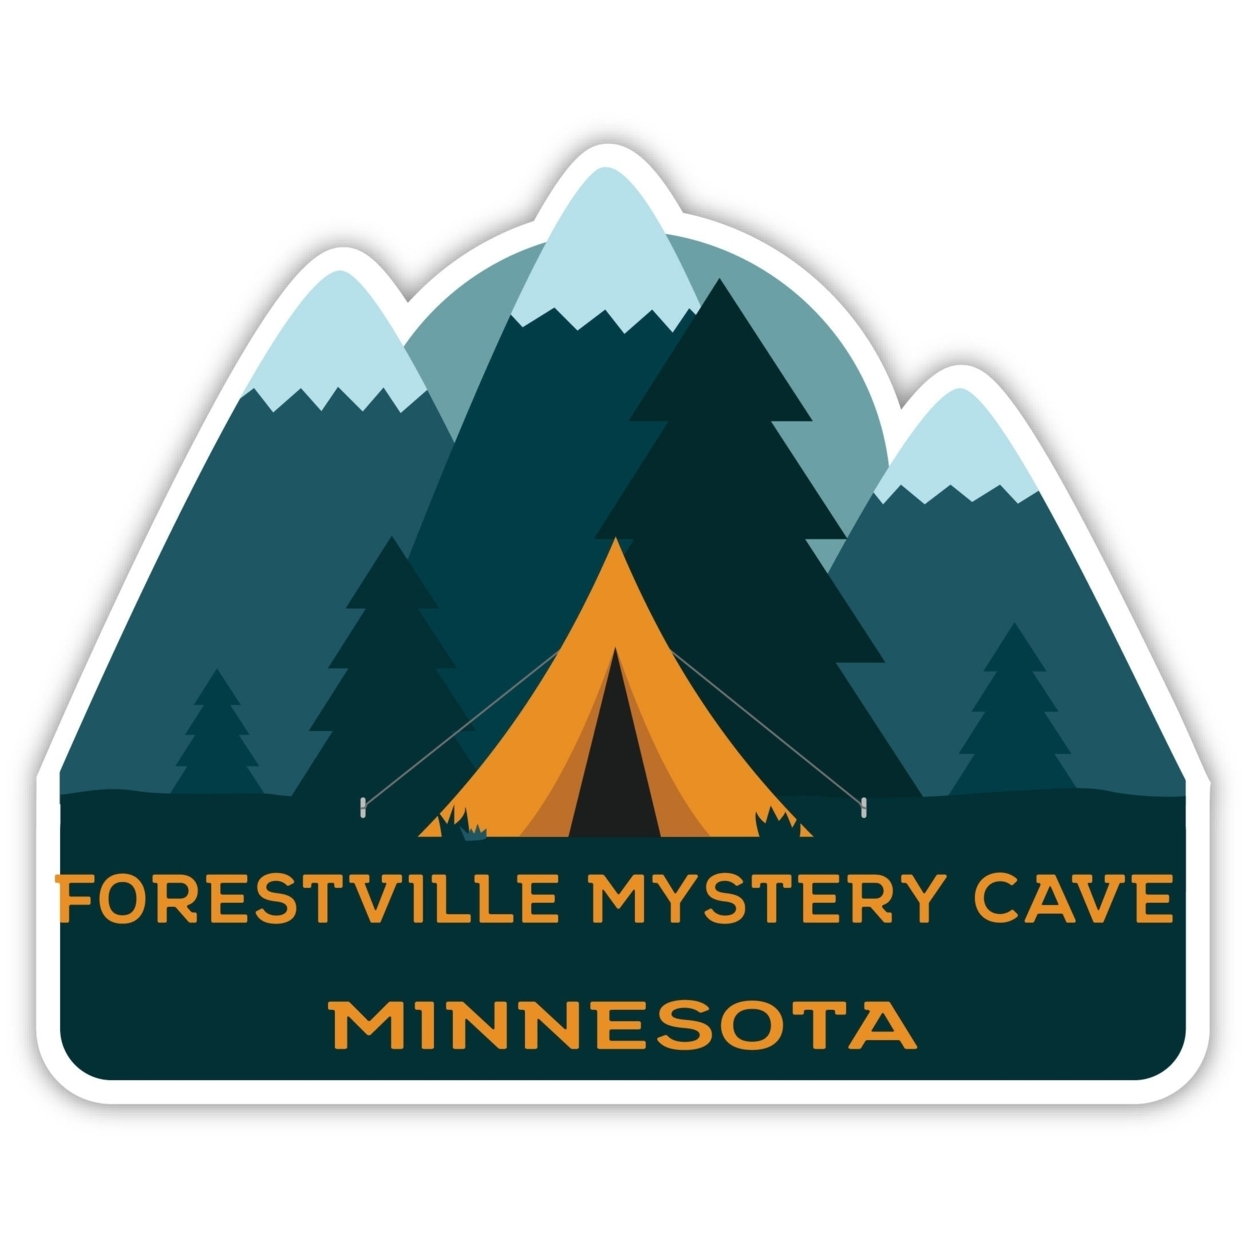 Forestville Mystery Cave Minnesota Souvenir Decorative Stickers (Choose Theme And Size) - 4-Pack, 4-Inch, Tent